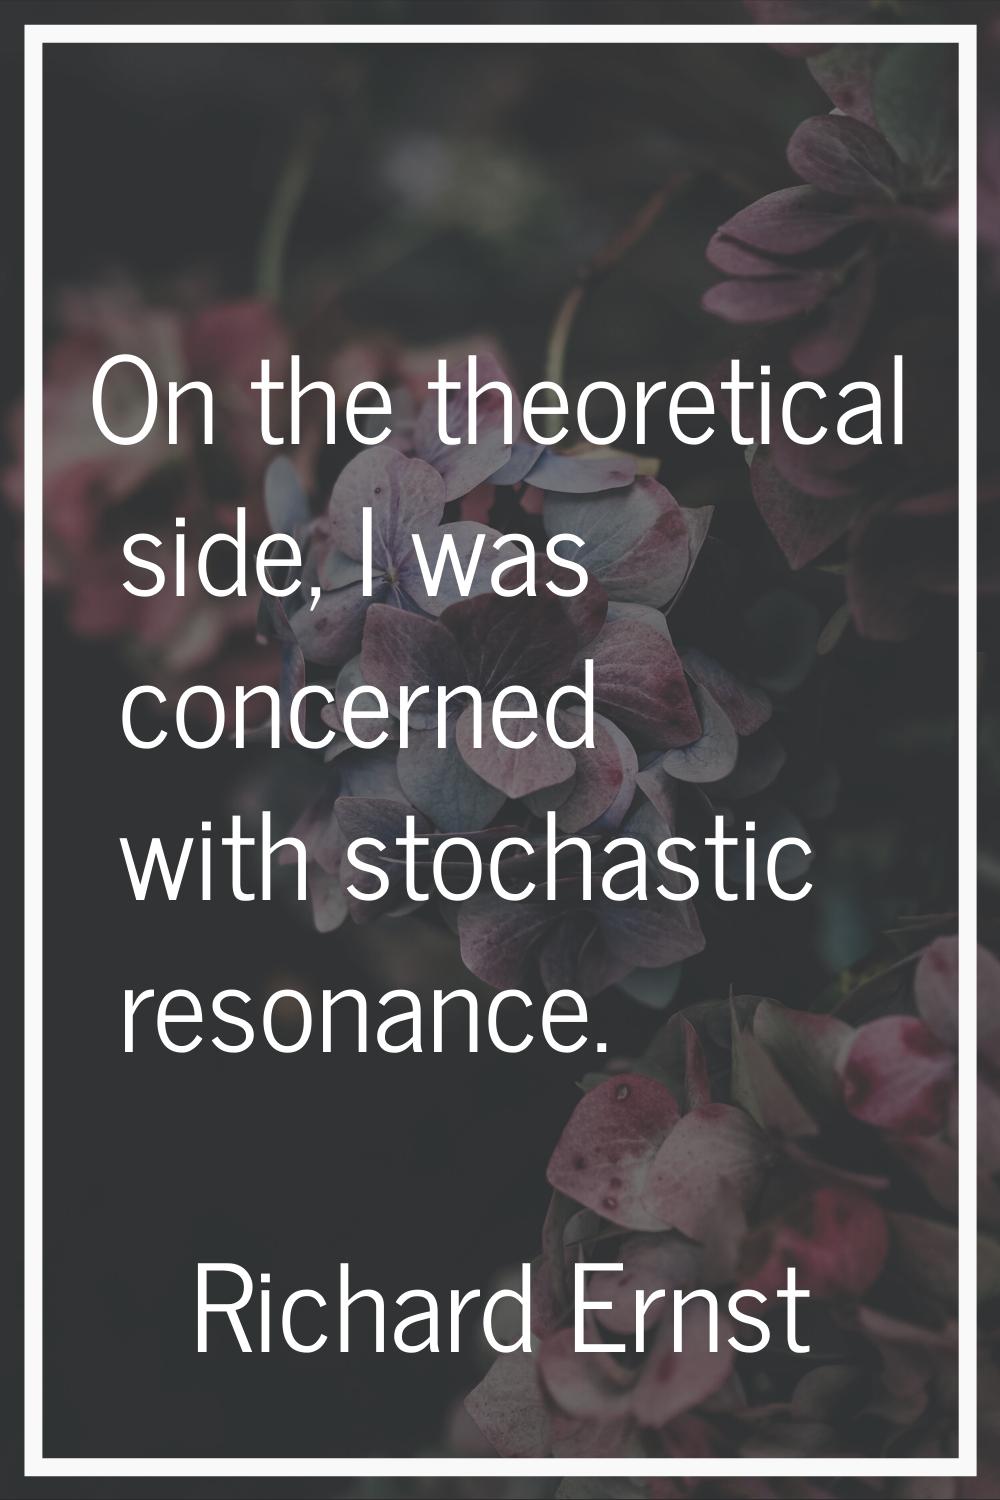 On the theoretical side, I was concerned with stochastic resonance.